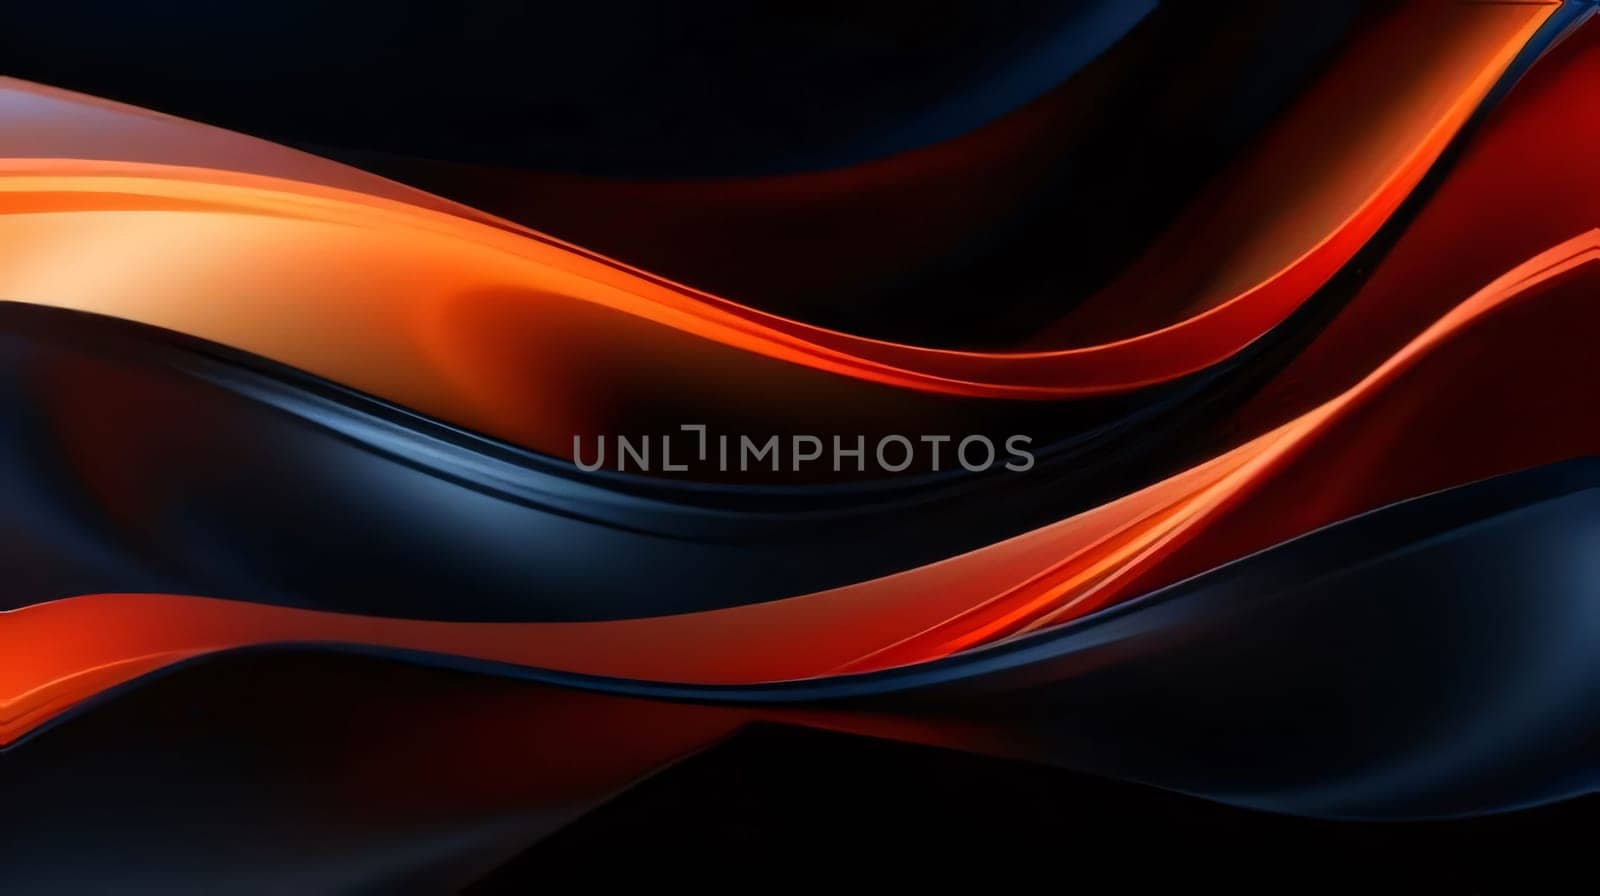 Abstract background design: abstract orange and black wavy background. 3d render illustration